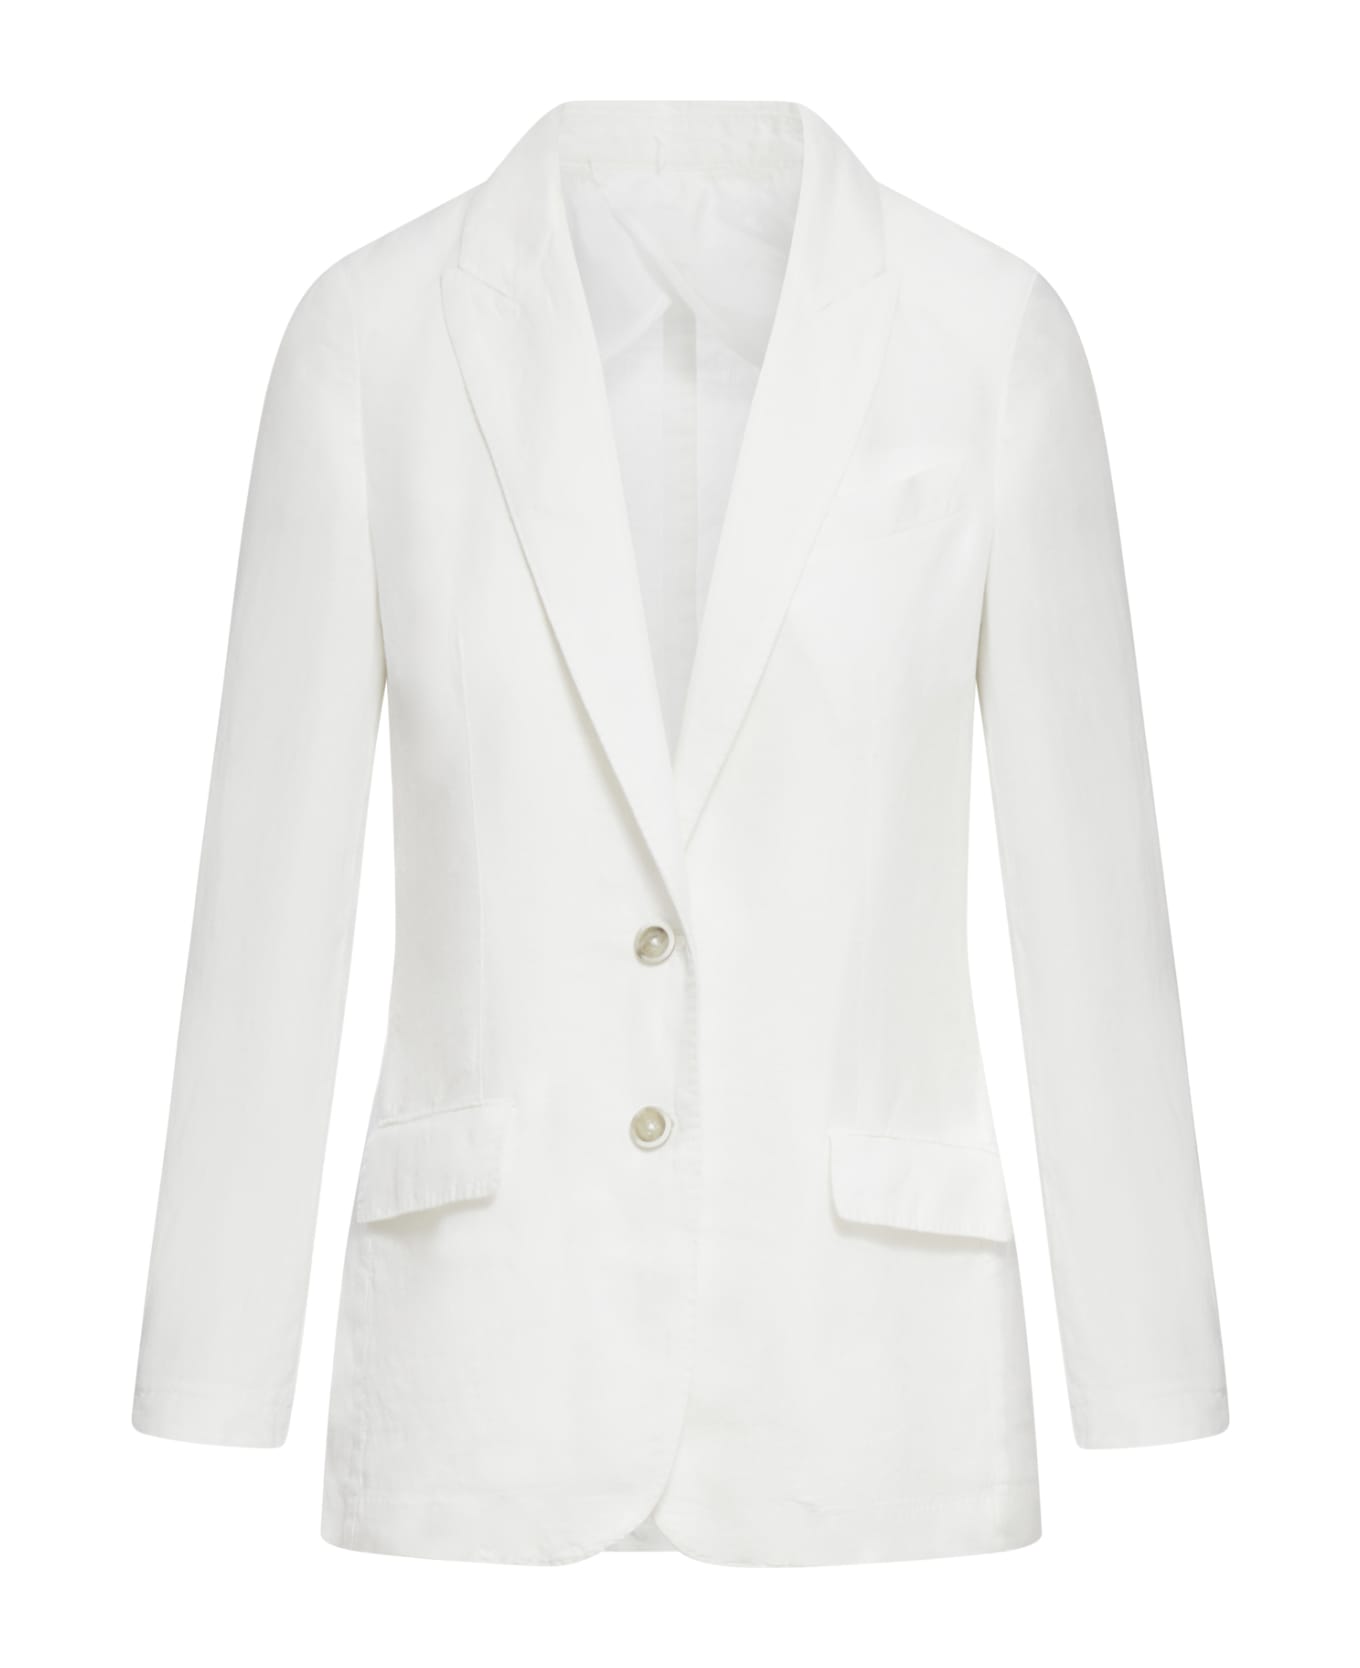 120% Lino Women Jacket With Mf Seams With 2 Buttons - White